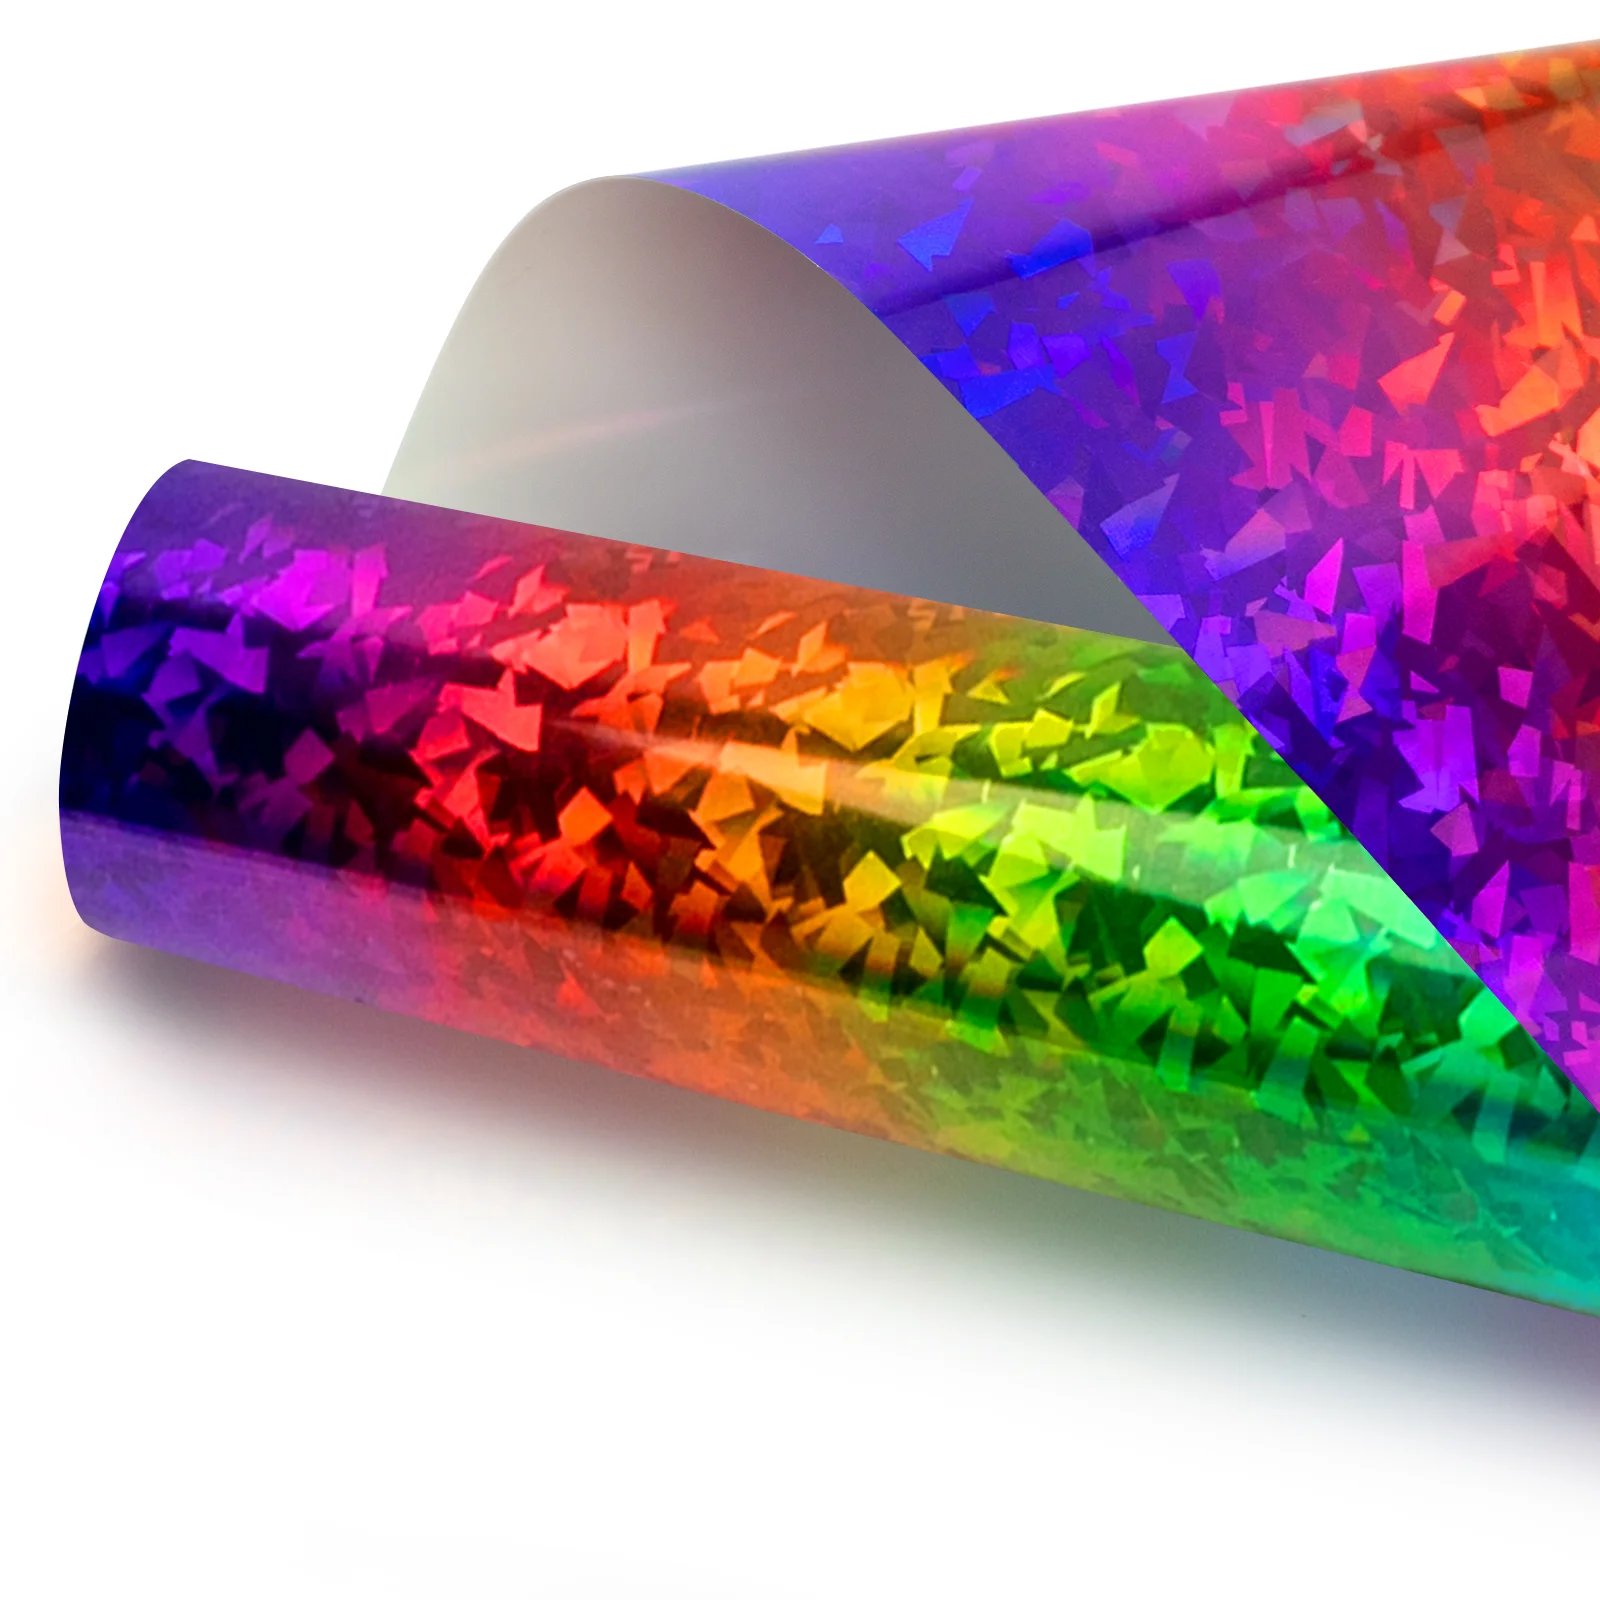 HTVRONT Colorful Crystal Holographic Heat Transfer Vinyl - 12 x